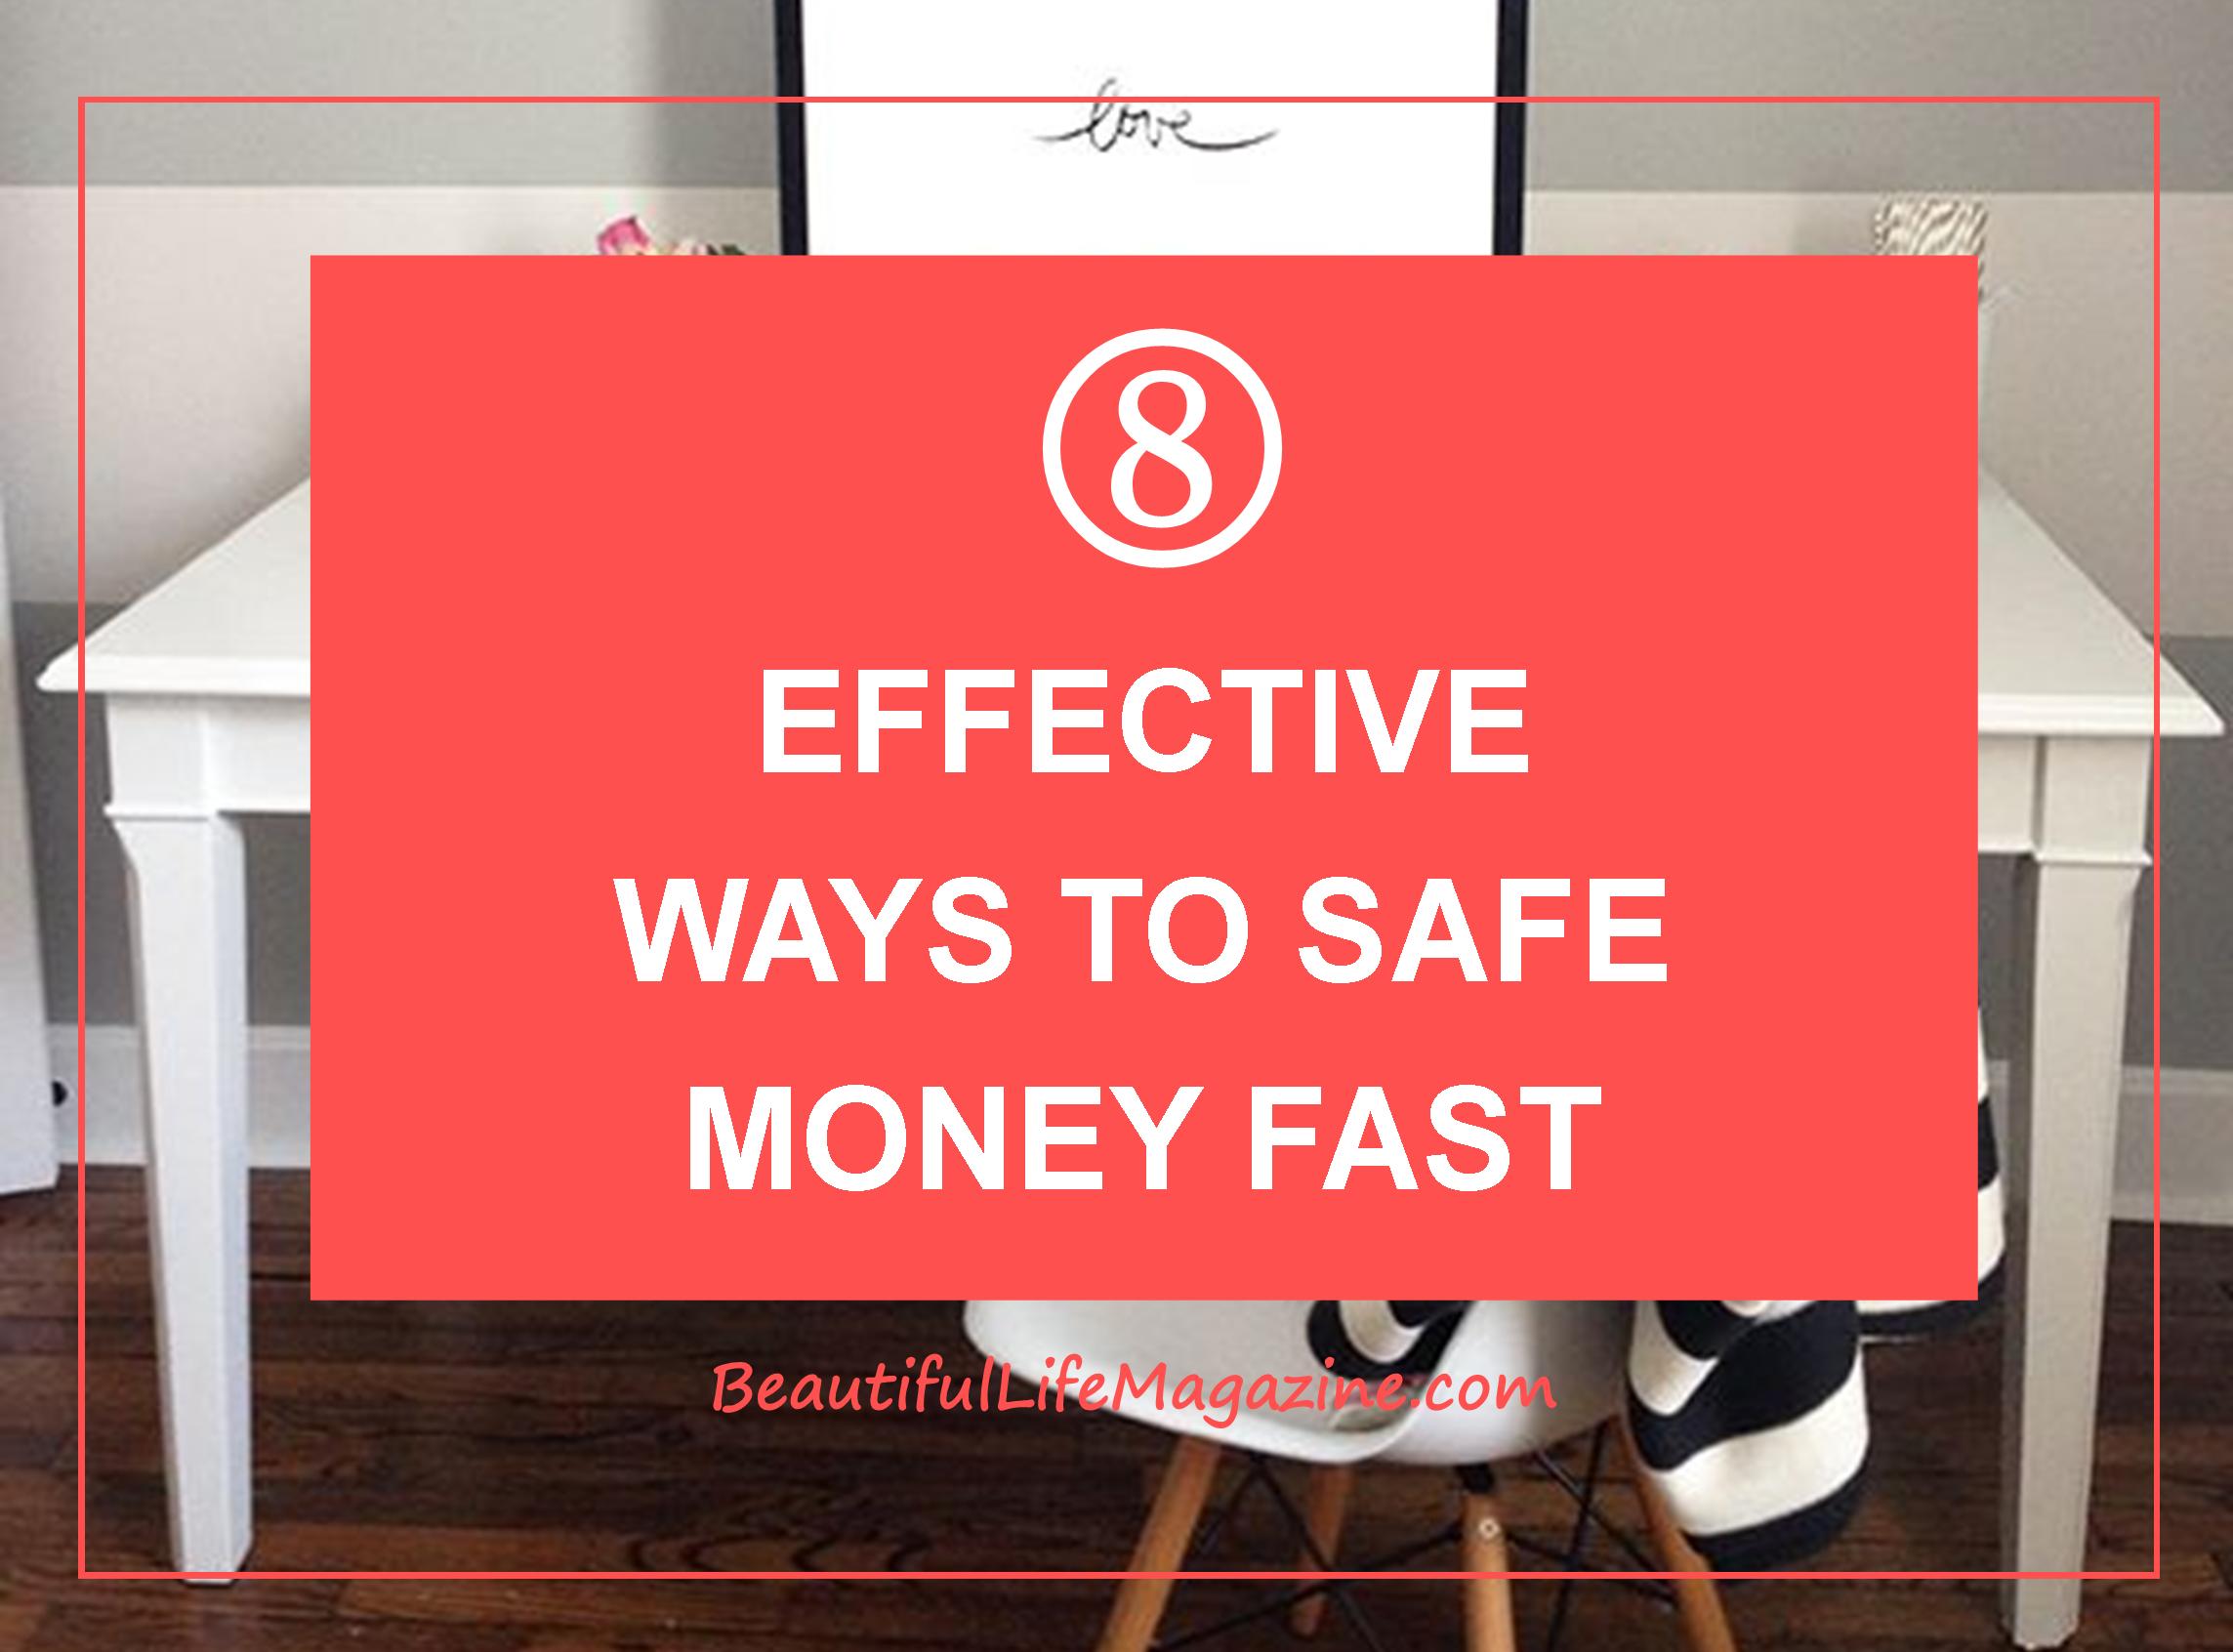 To save money quickly, you need to focus on the right savings strategies. Here are 8 tips to help you save money faster